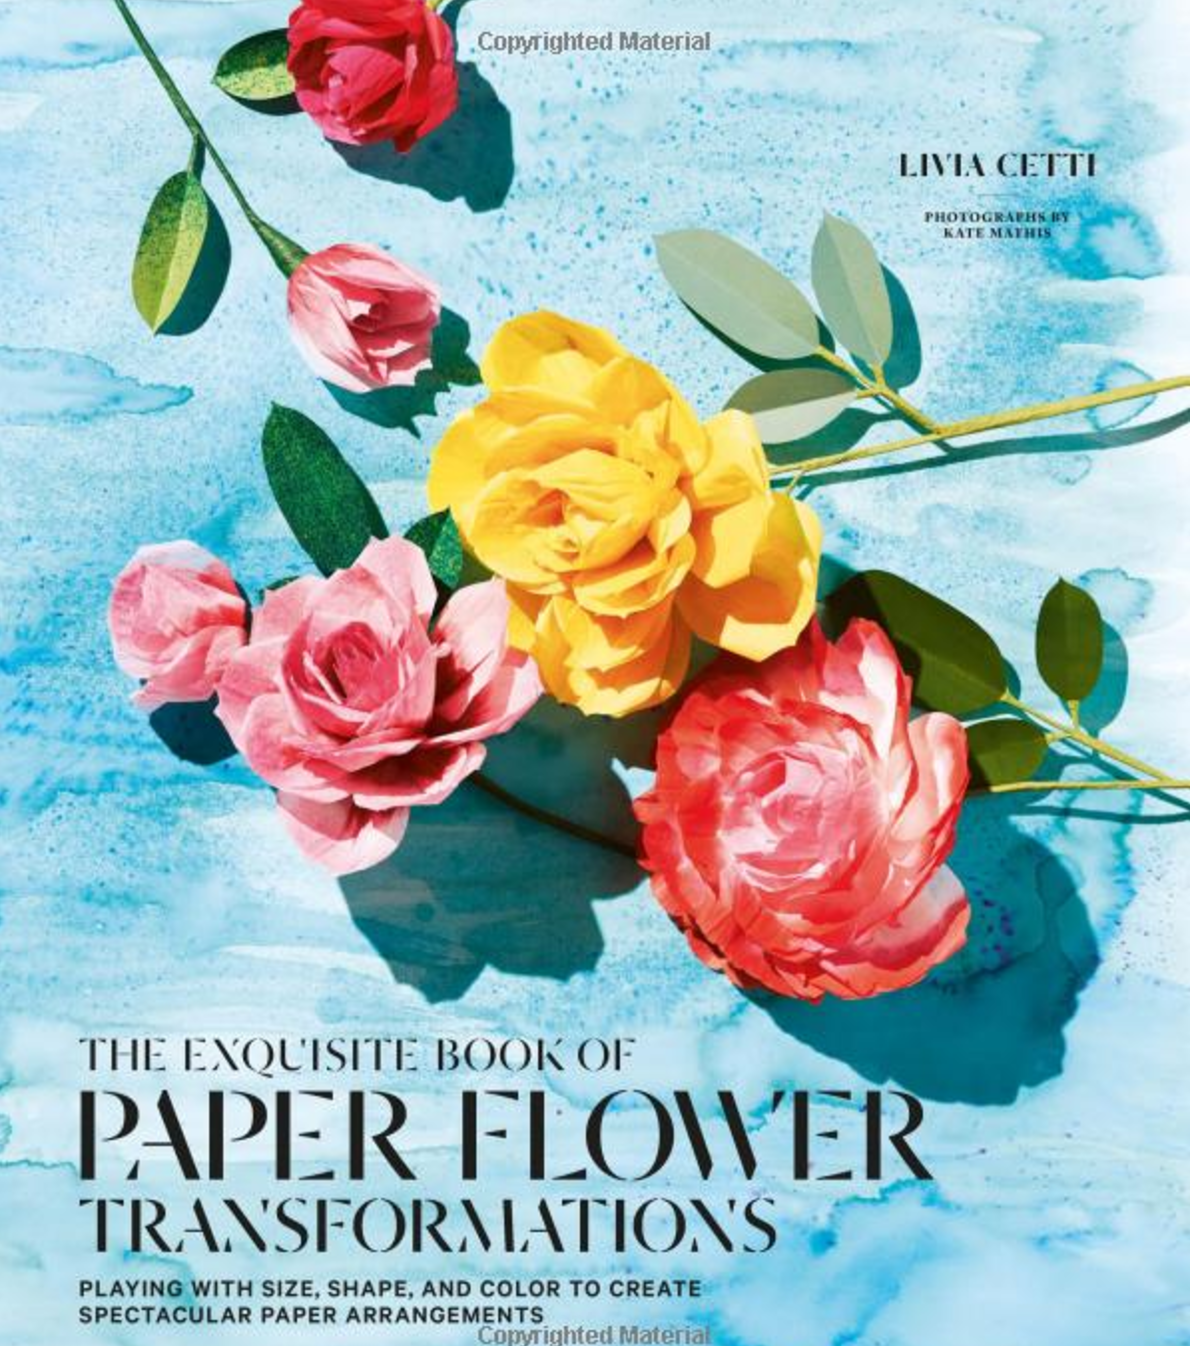 The Exquisite Book of Paper Flower Transformations